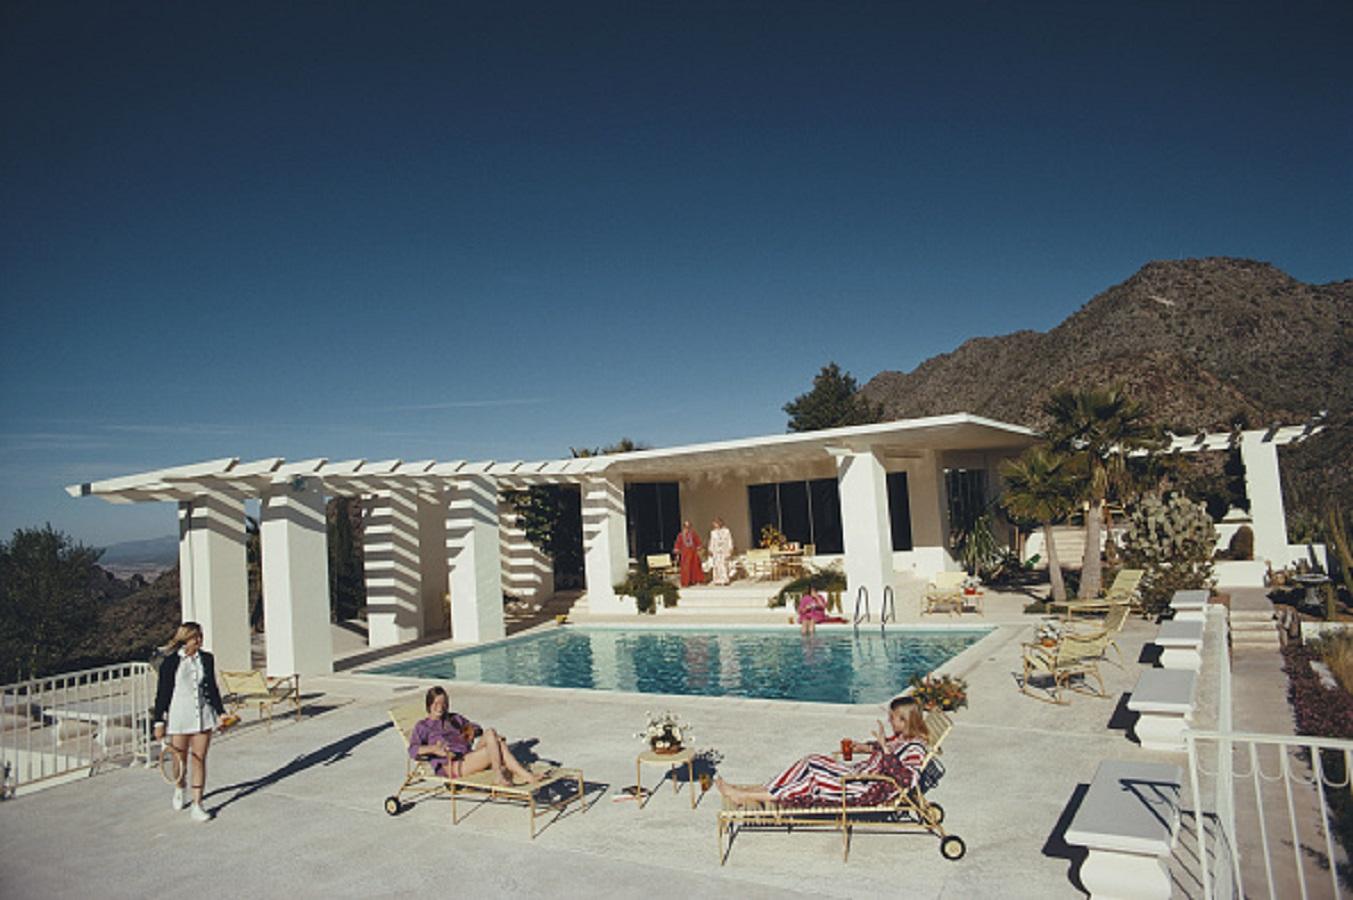 'Scottsdale Home' 1973 Slim Aarons Limited Estate Edition Print 

Guests by the pool at the home of Wayne Beal in Scottsdale, Arizona, January 1973. 
(Photo by Slim Aarons/Getty Images)

Produced from the original transparency
Certificate of